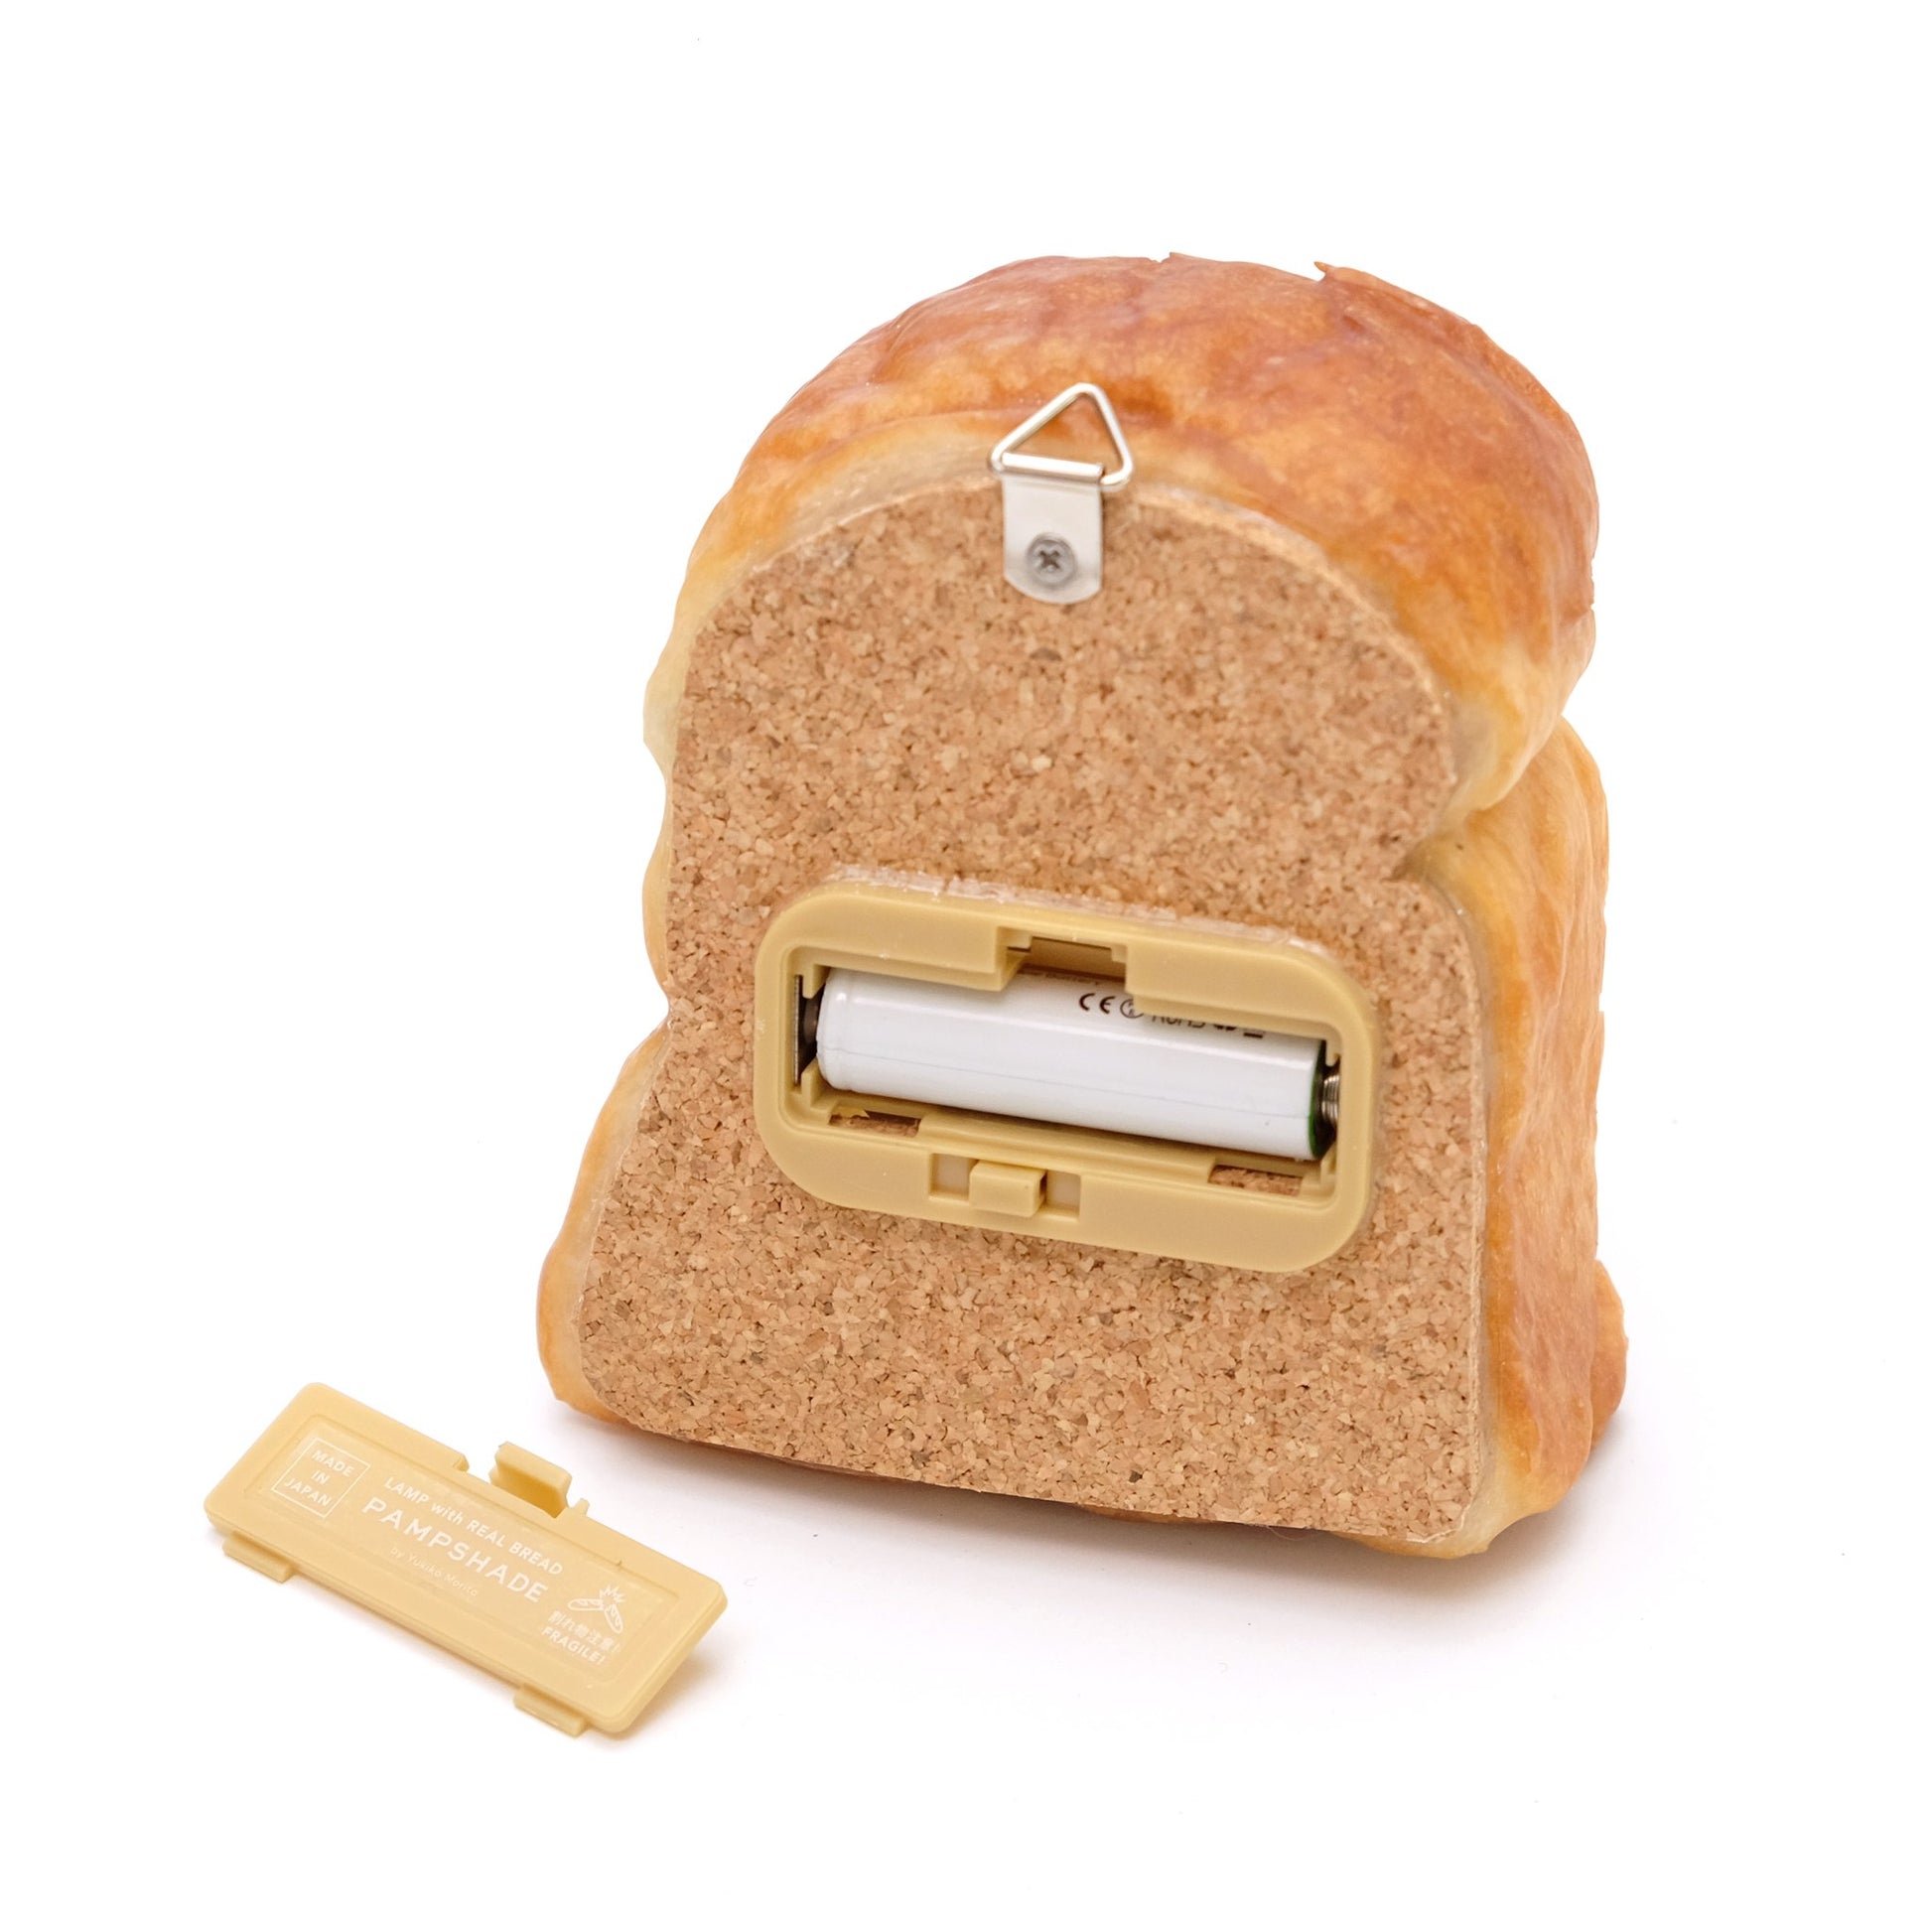 Cork Back of Bread lamp featuring a hook for hanging and a case for one battery